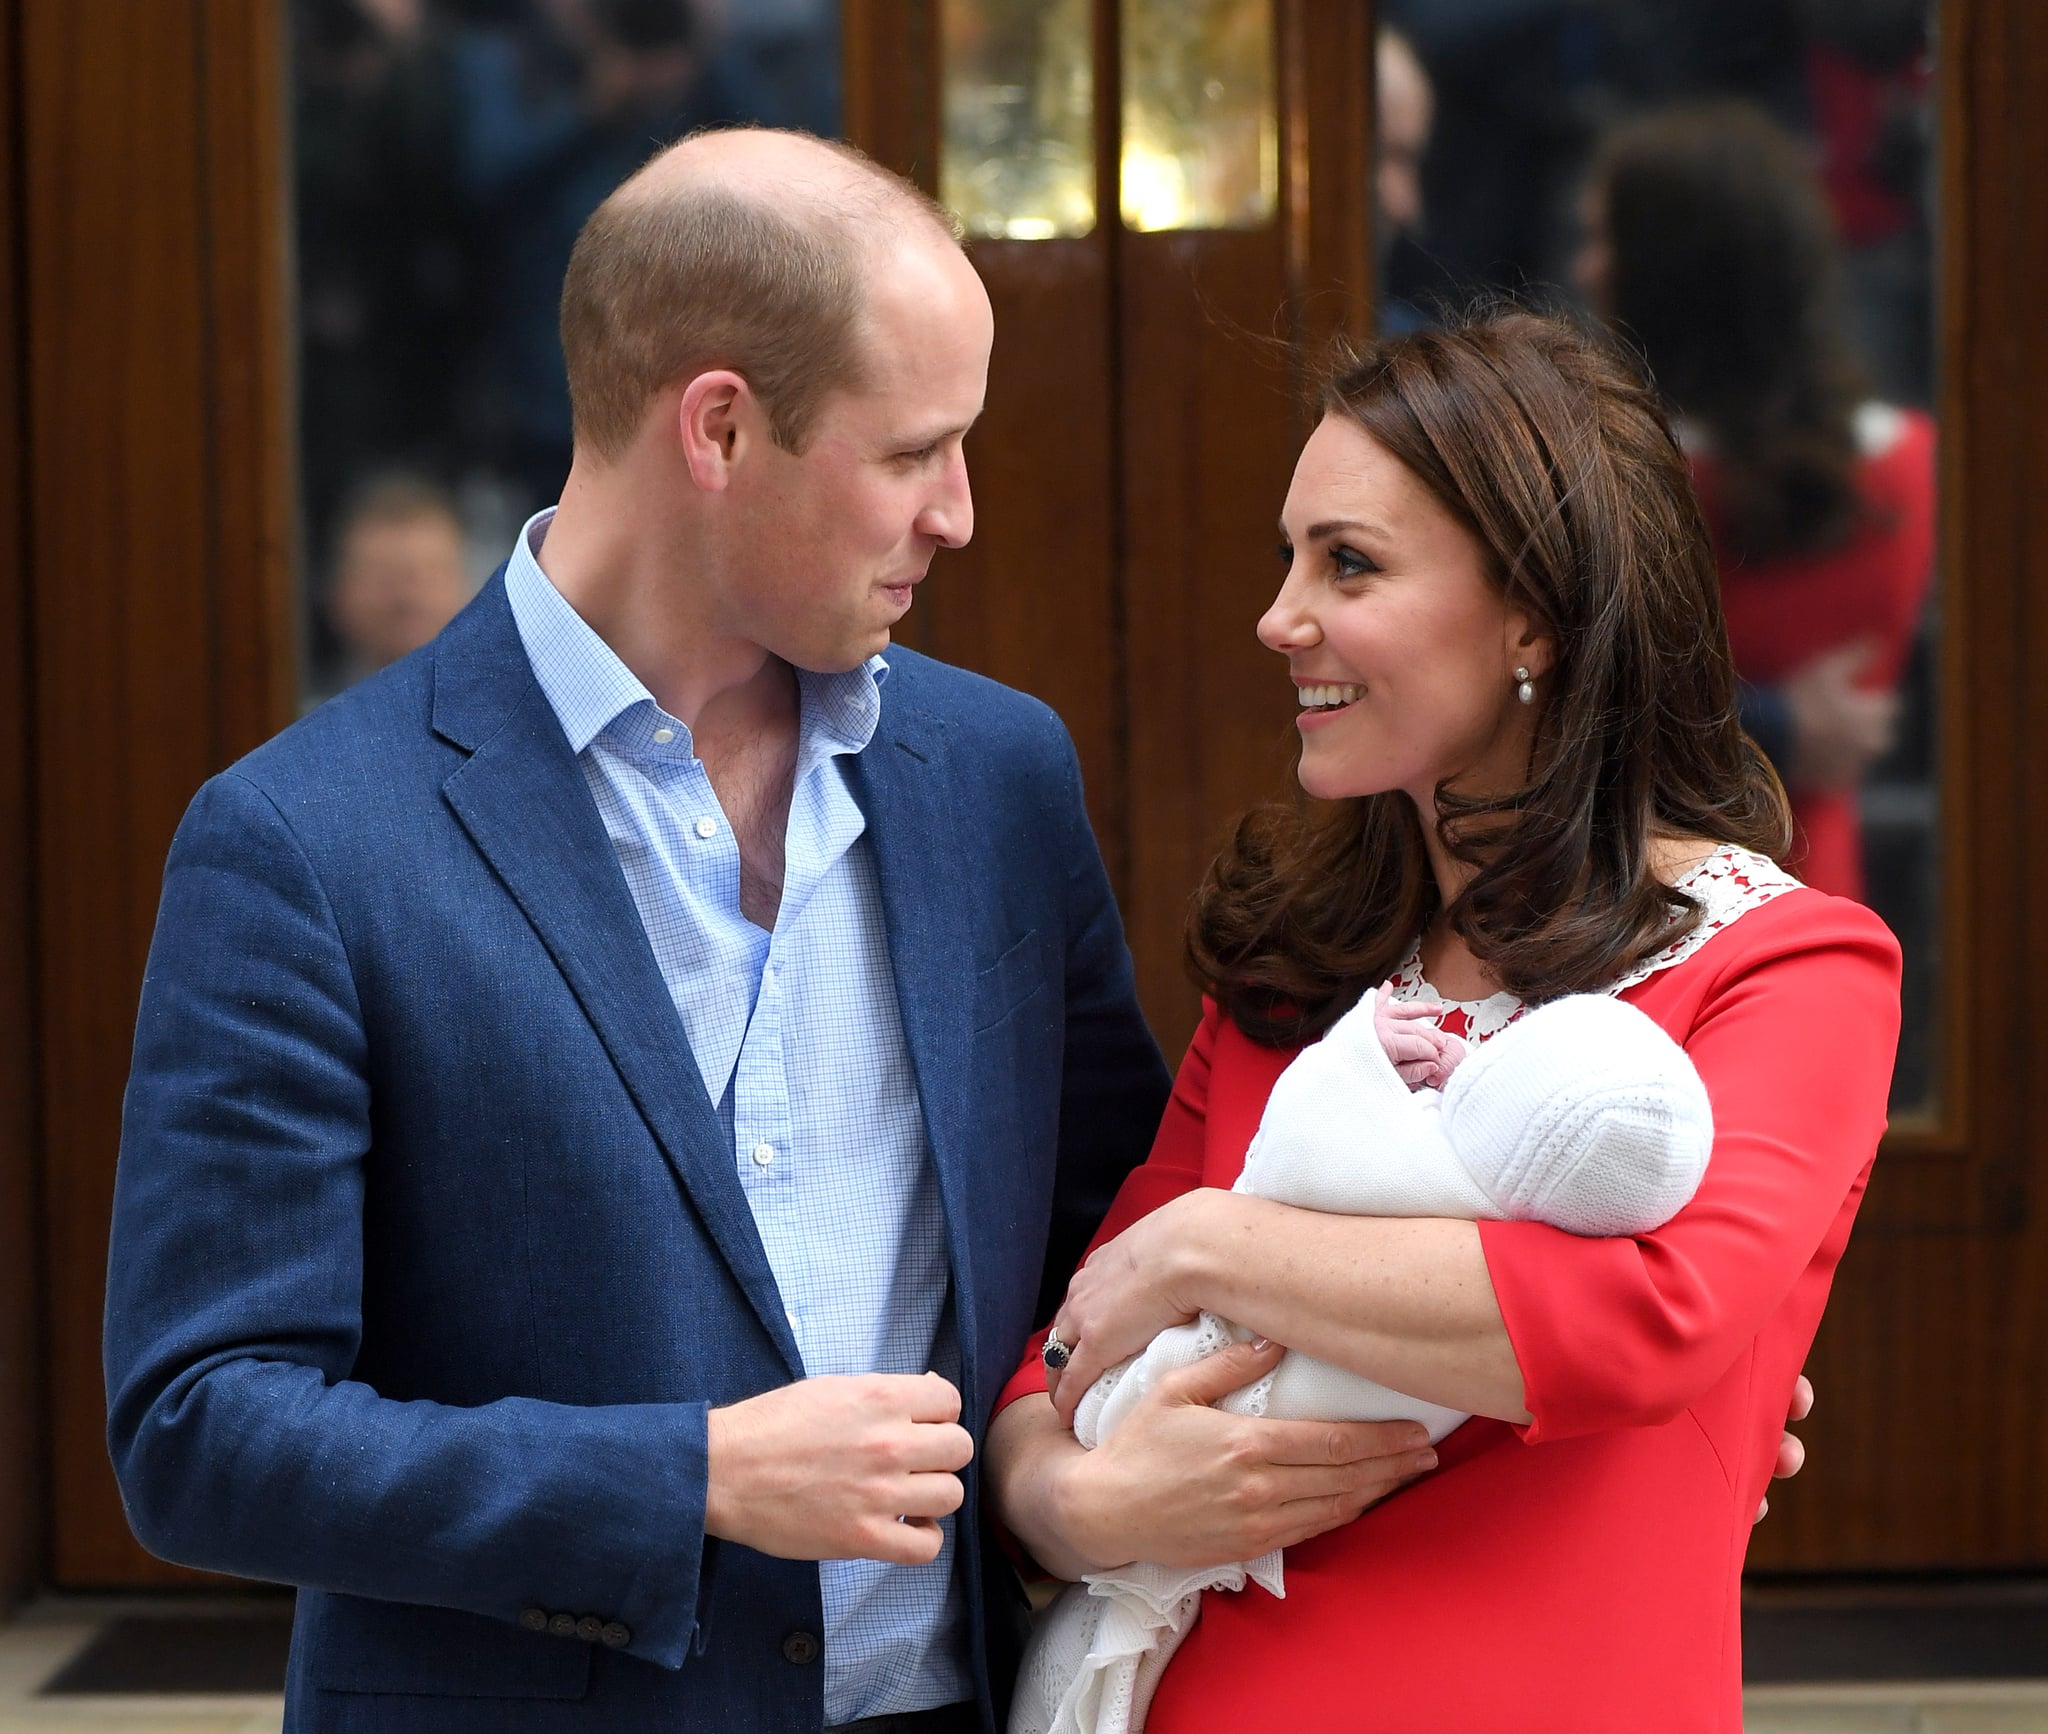 LONDON, ENGLAND - APRIL 23:  Catherine, Duchess of Cambridge and Prince William, Duke of Cambridge depart the Lindo Wing with their newborn son Prince Louis of Cambridge at St Mary's Hospital on April 23, 2018 in London, England. The Duchess safely delivered a boy at 11:01 am, weighing 8lbs 7oz, who will be fifth in line to the throne.  (Photo by Karwai Tang/WireImage)